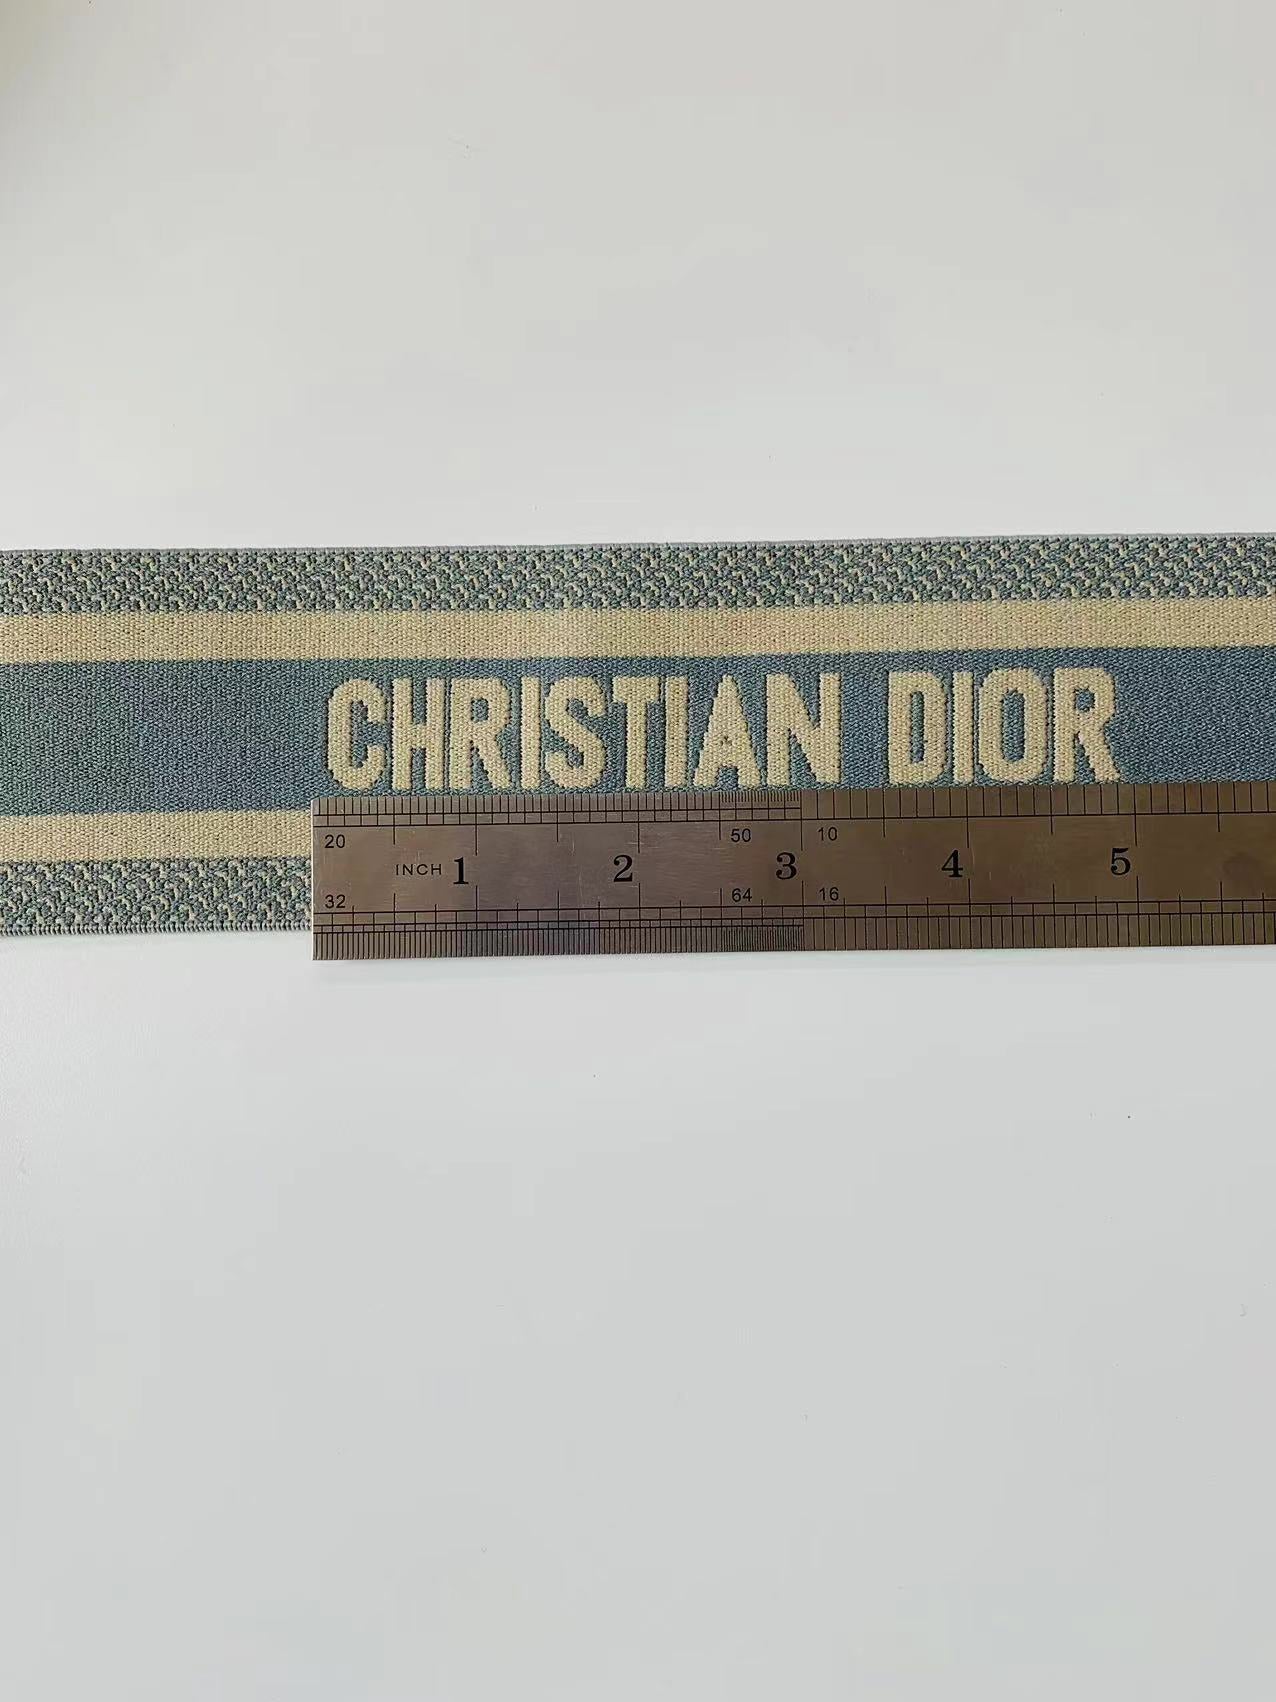 Christian Dior Paris 2.5 inch Elastic Strap ,Handmade Striped Ribbon Trim Embroidered For shoes ,Bags ,Clothing ,Handicrafts By Yard (Blue)